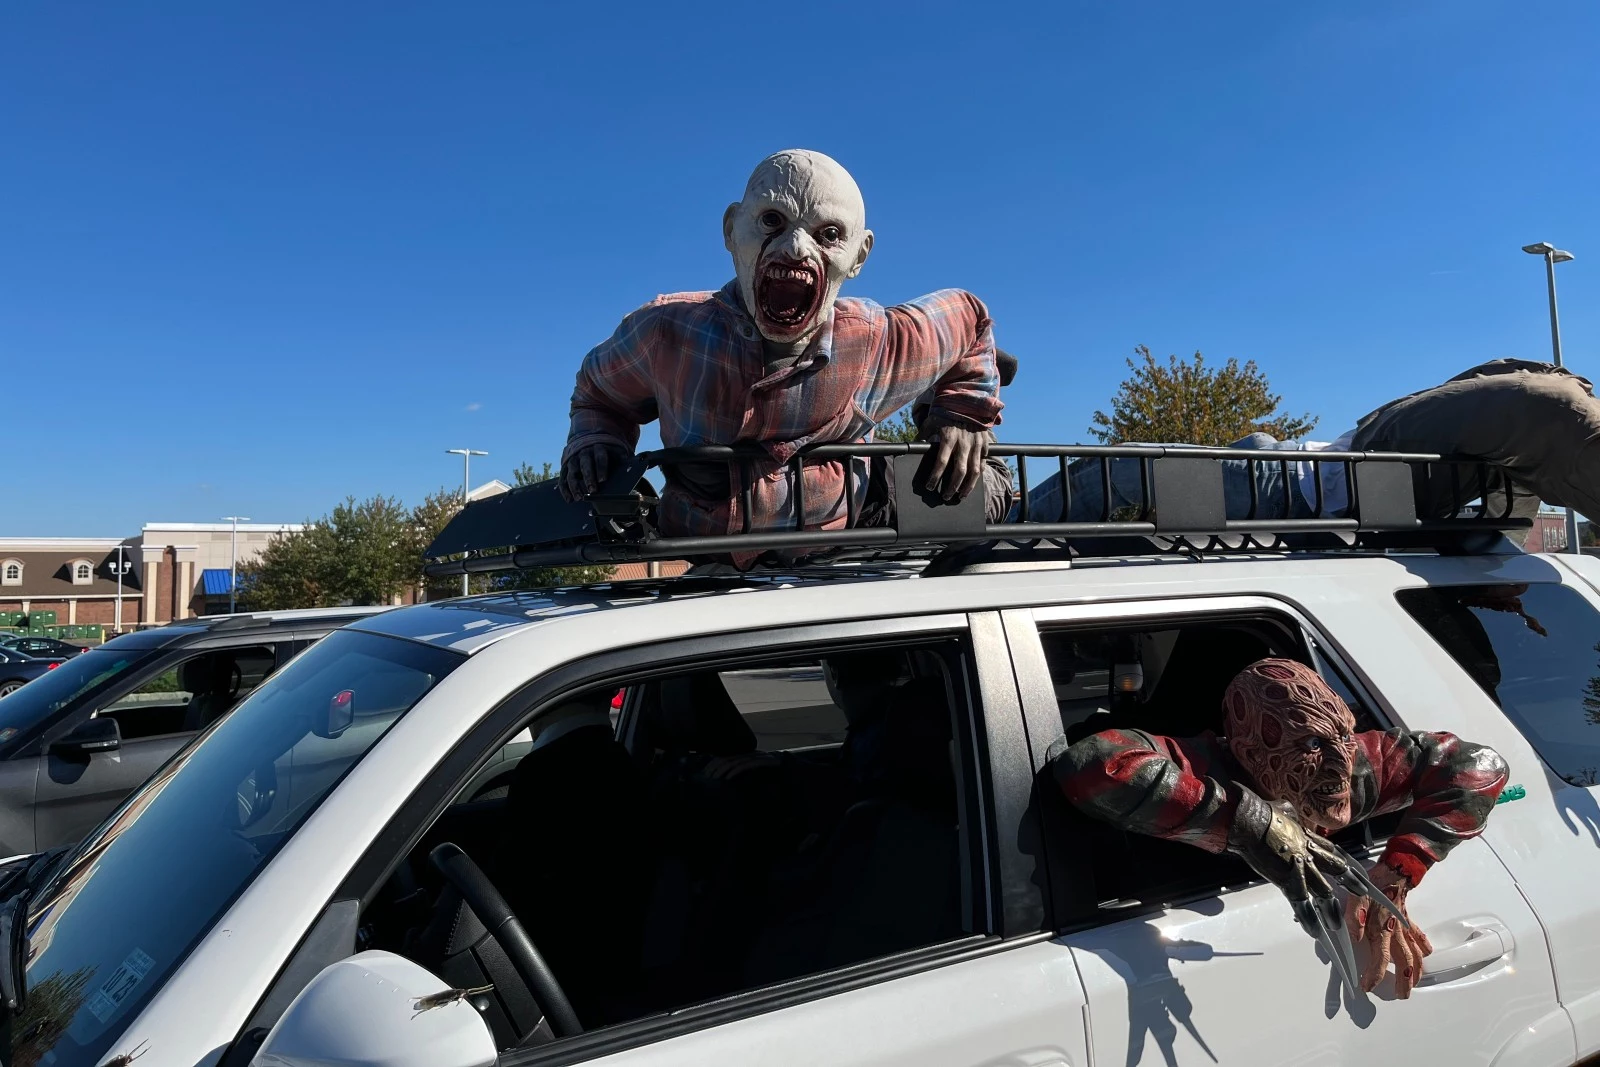 The creepiest Halloween car in NJ belongs to a guy from Somerset photo